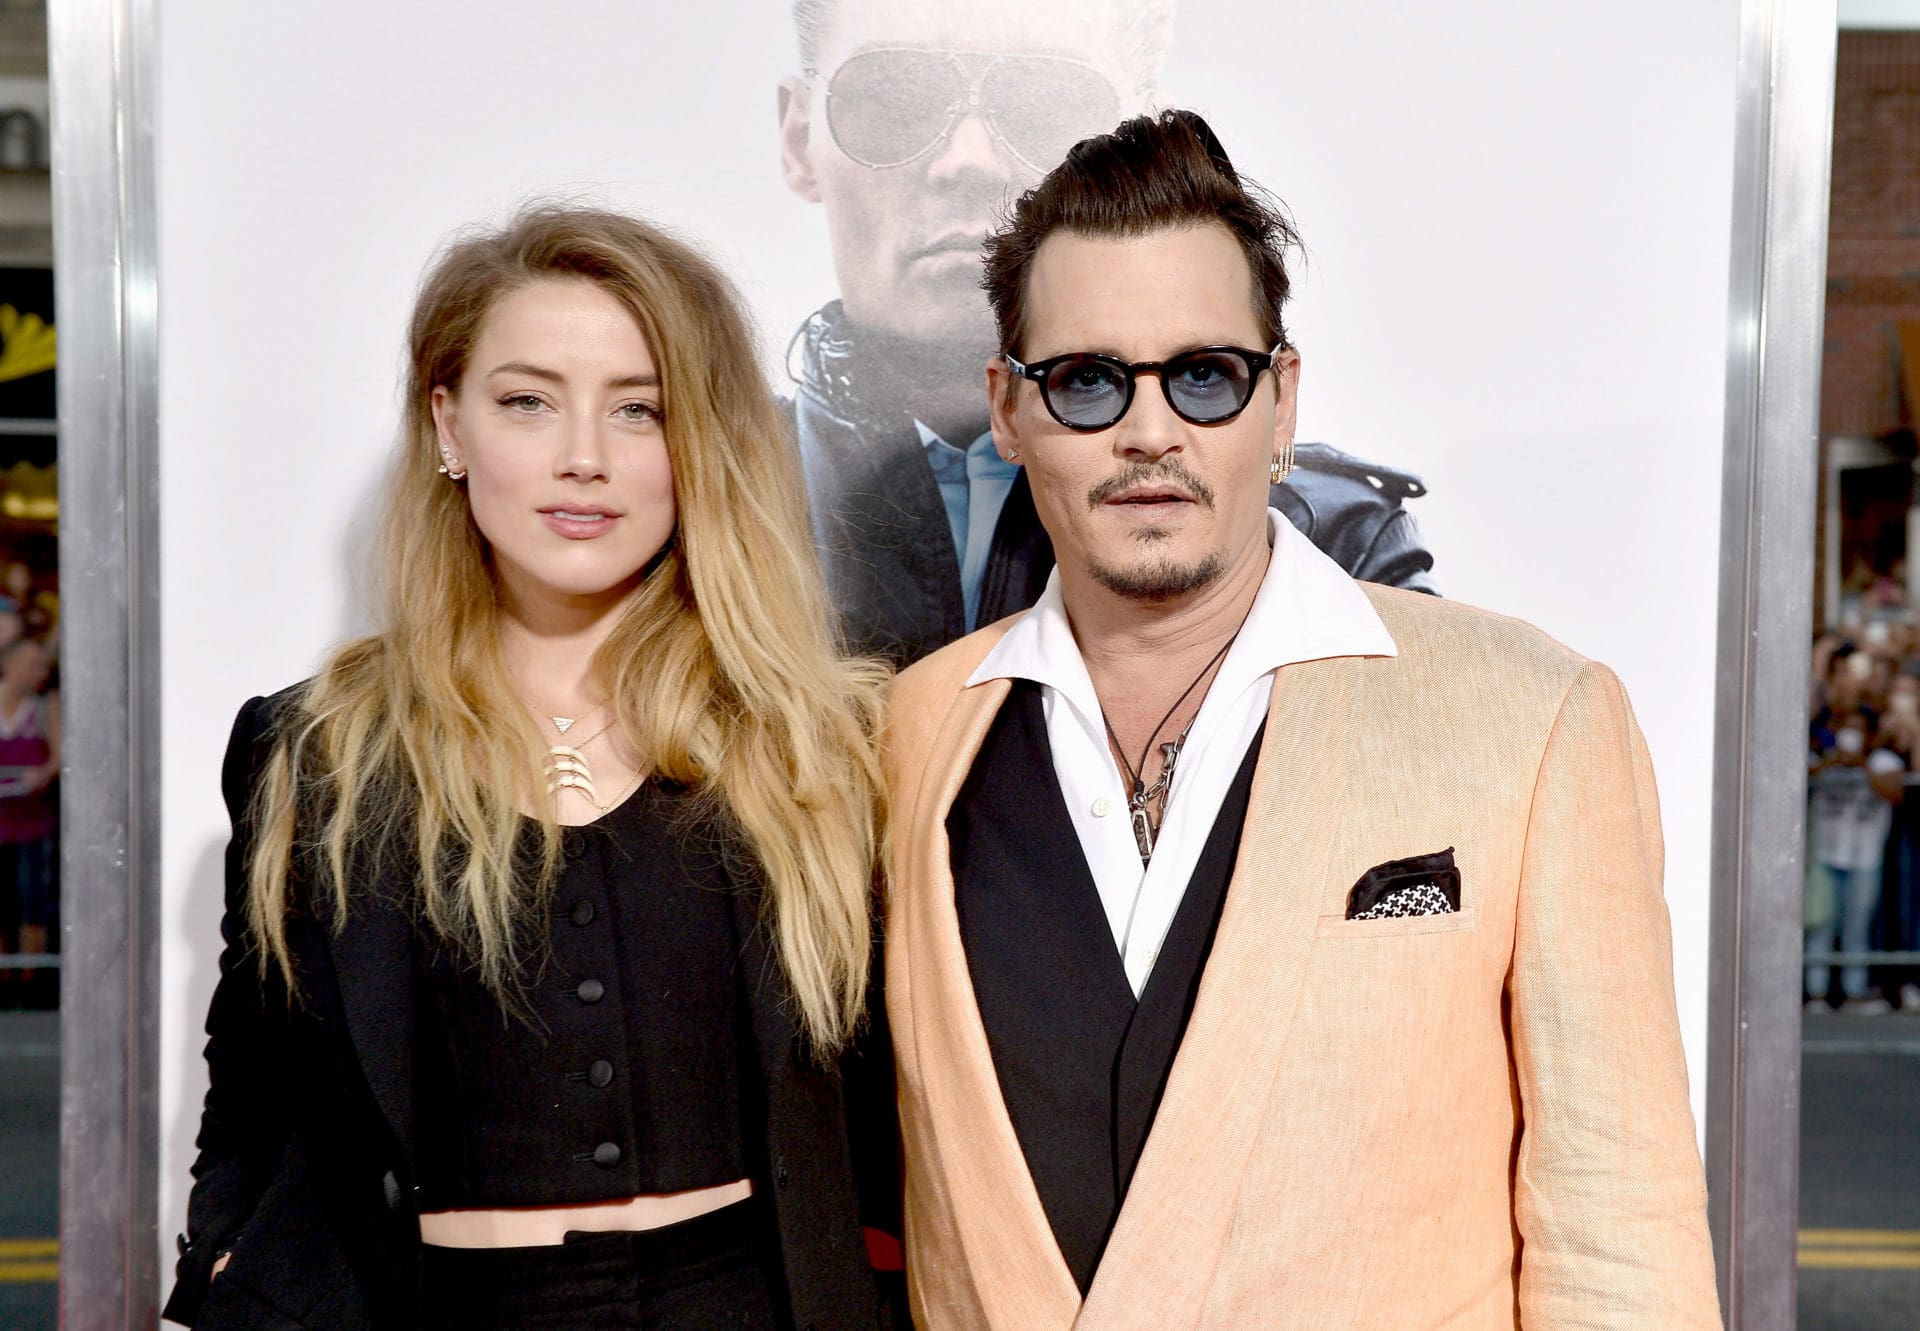 dc-films-president-denies-any-influence-of-court-trial-between-amber-heard-and-johnny-depp-on-upcoming-aquaman-2